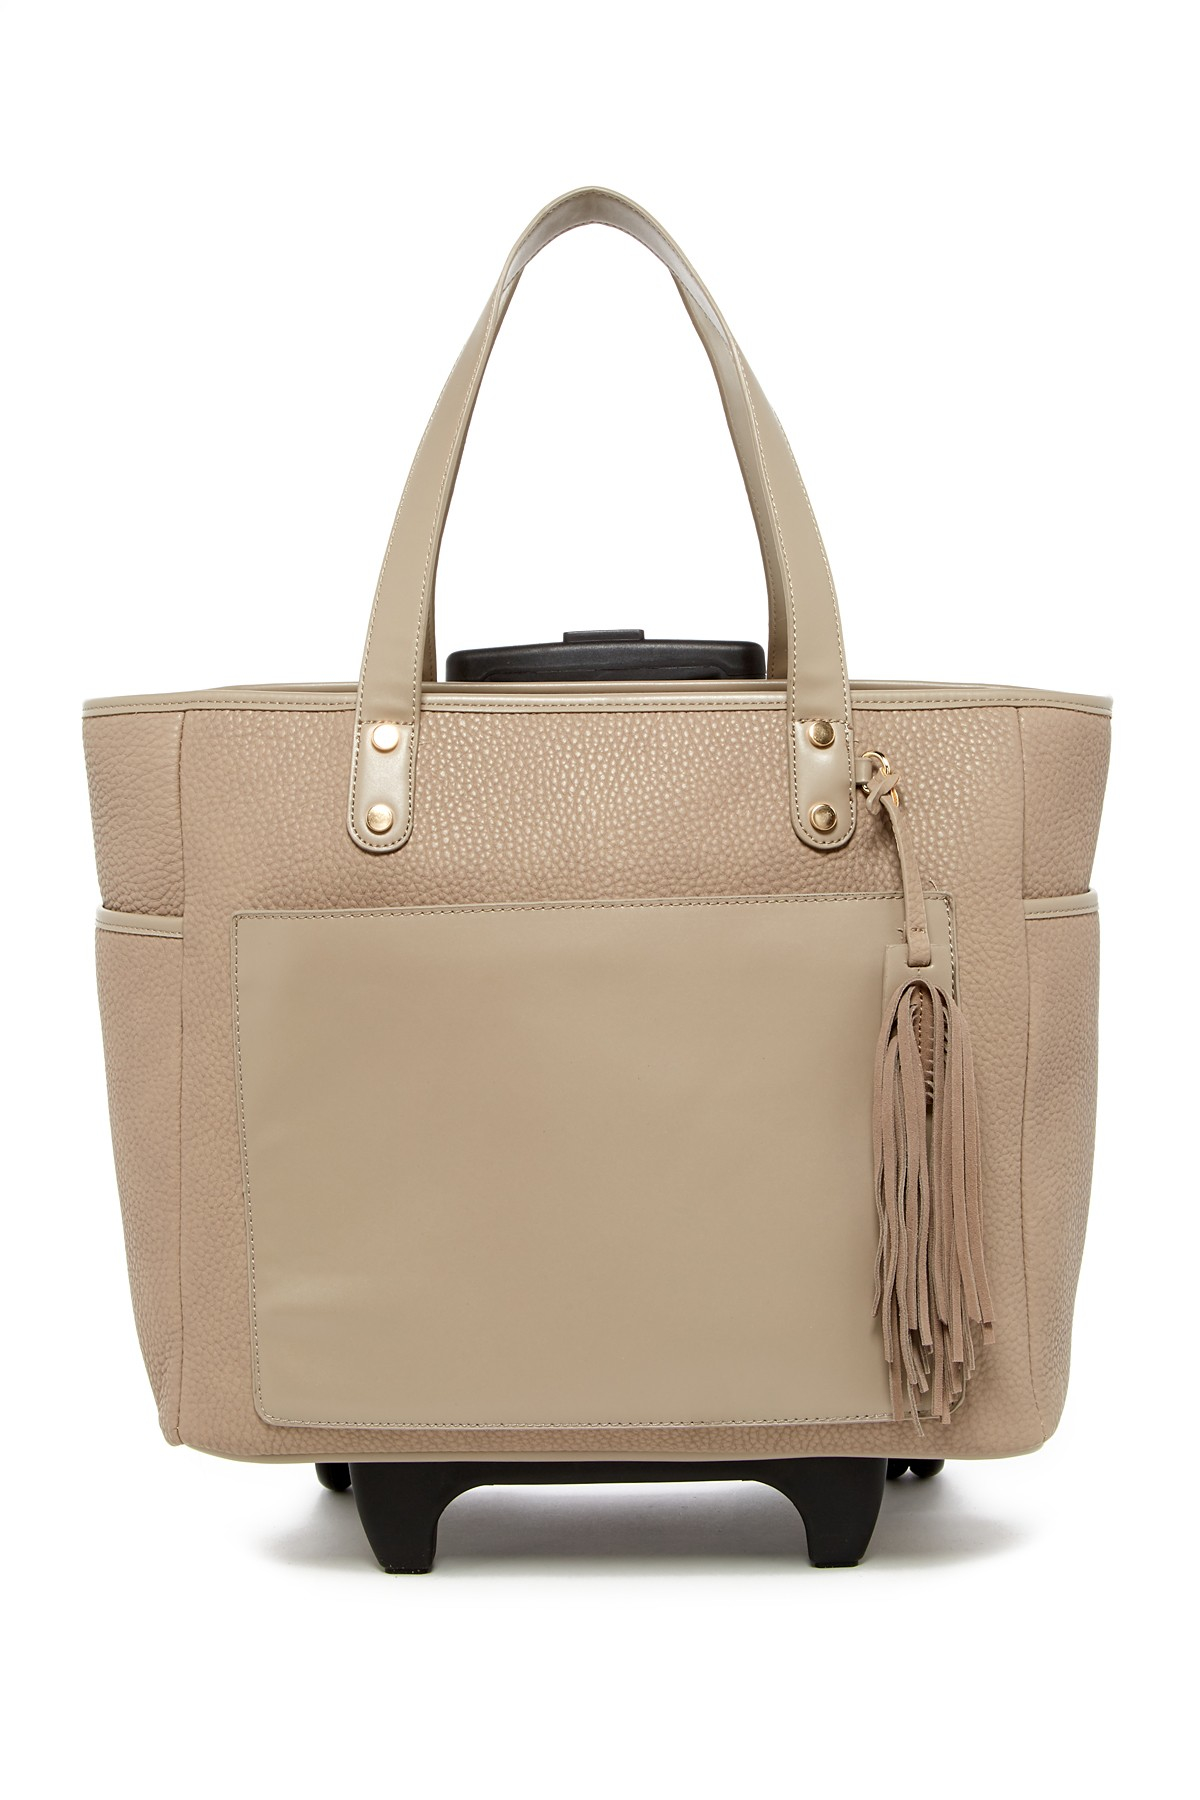 Lyst - Shiraleah Porter Roller Tote in Natural